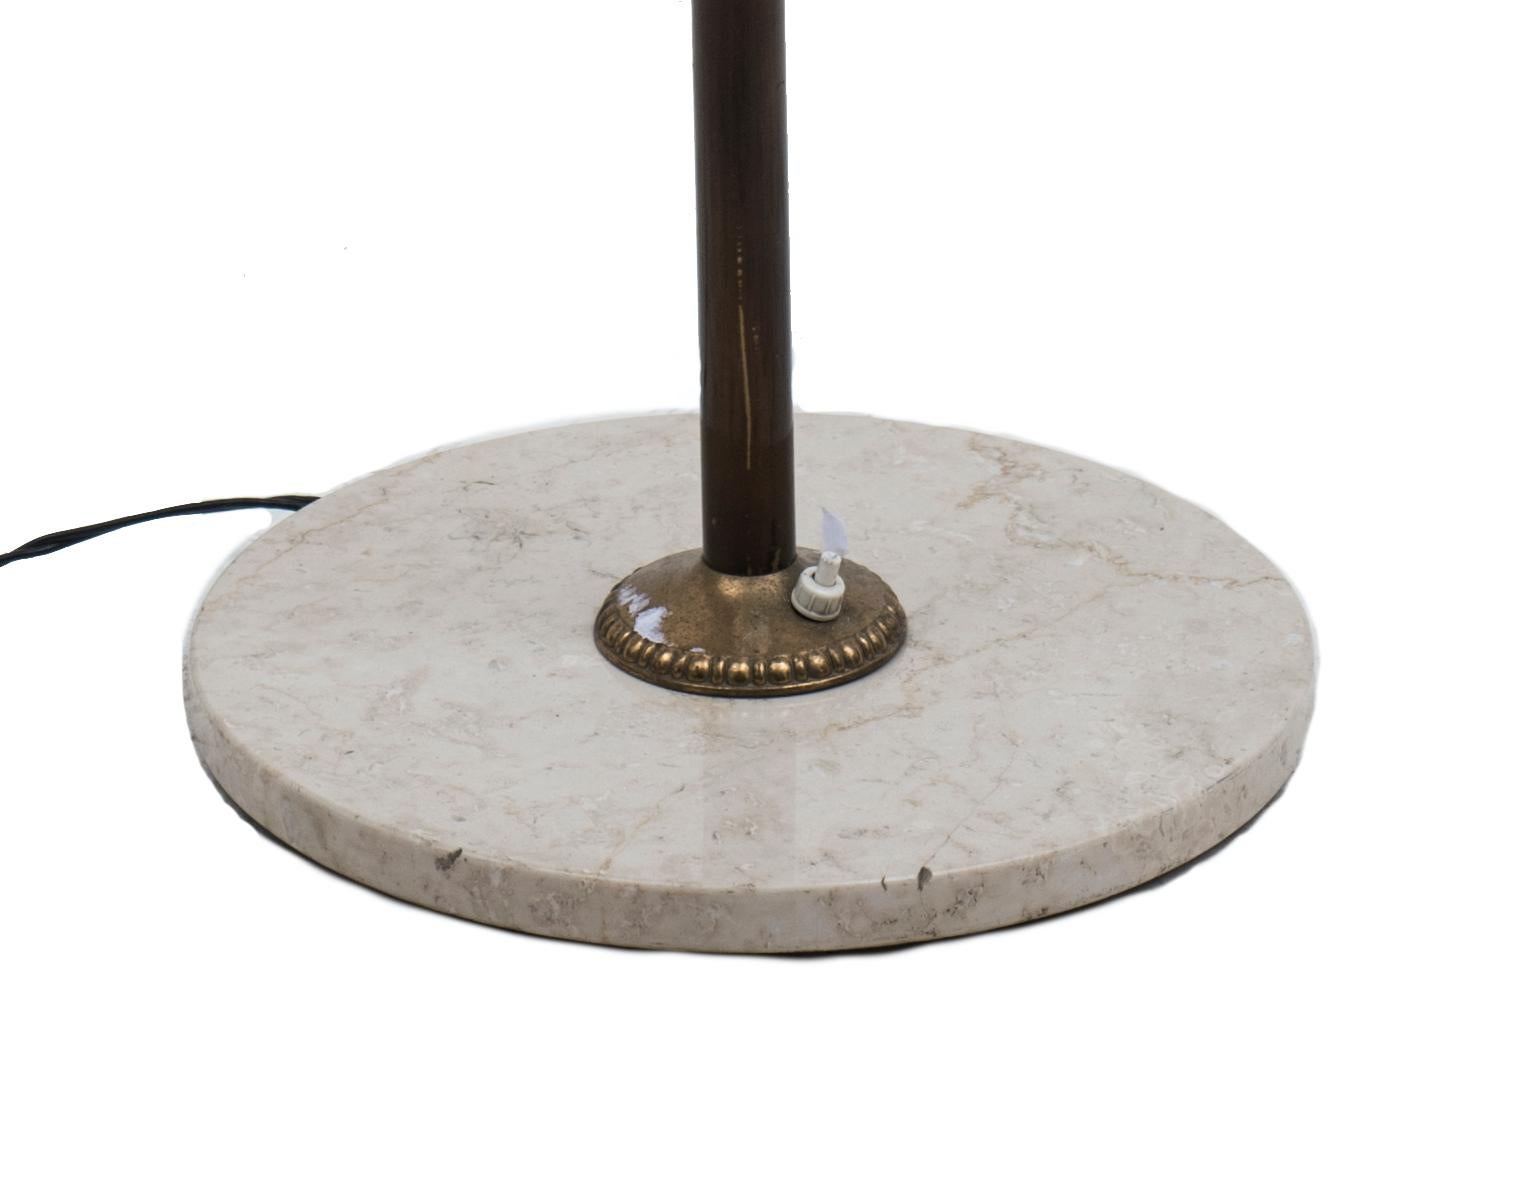 Floor lamp in brass and satin glass diffusers. Marble base.
Very good conditions.
This object is shipped from Italy. Under existing legislation, any object in Italy created over 70 years ago by an artist, designer or craftsman who has died